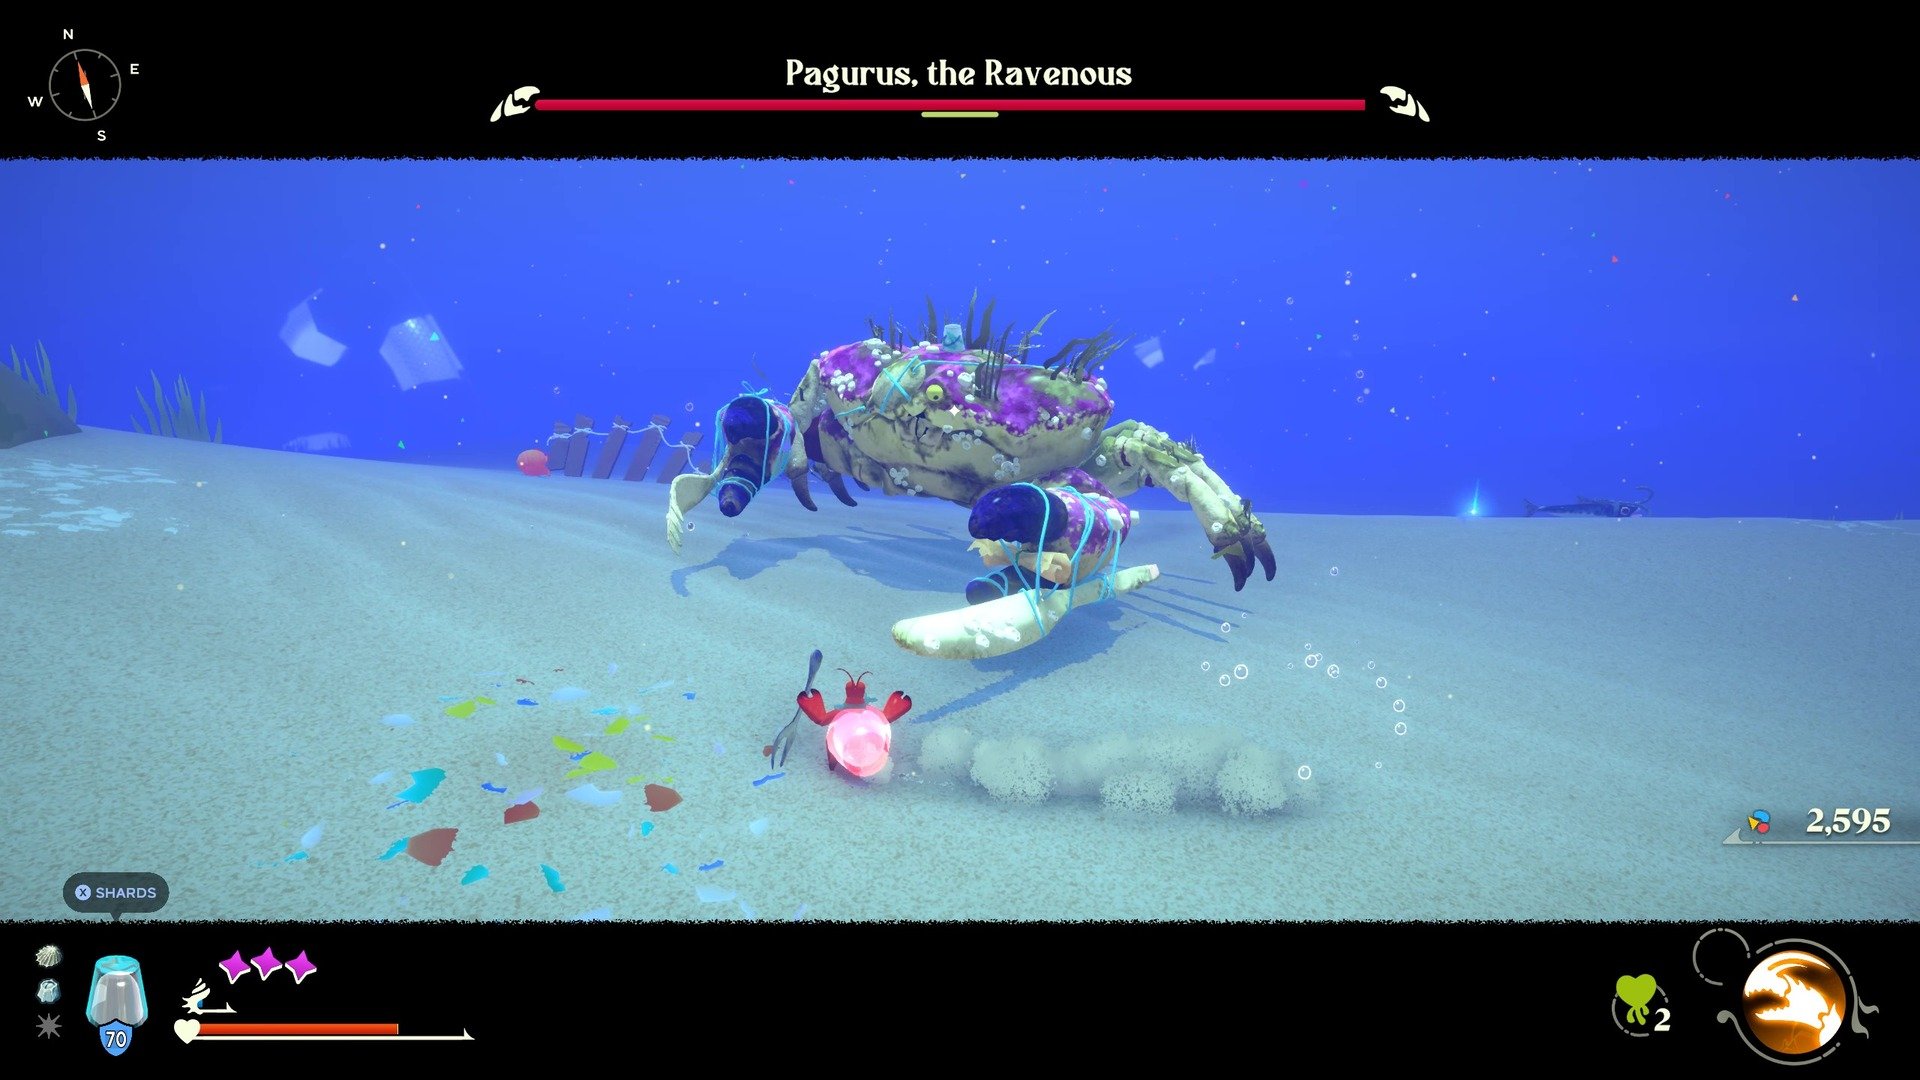 Kril taking on the Pagurus boss in Another Crab's Treasure